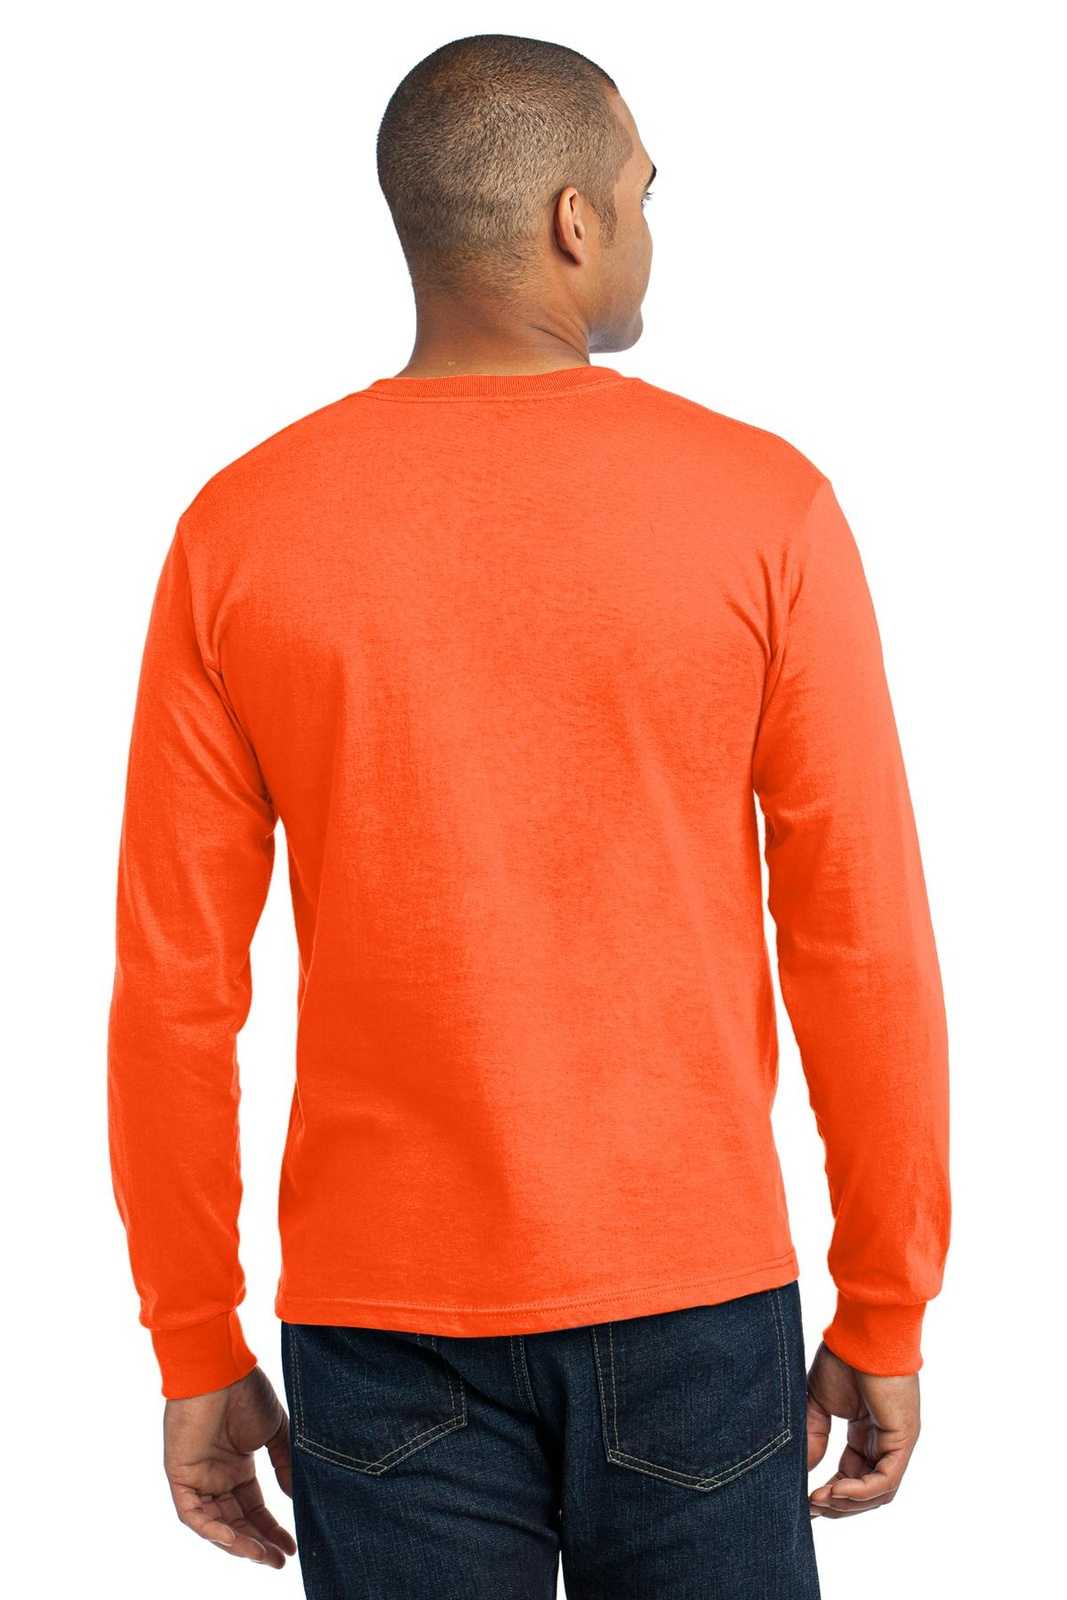 Port &amp; Company USA100LS Long Sleeve All-American Tee - Safety Orange - HIT a Double - 2